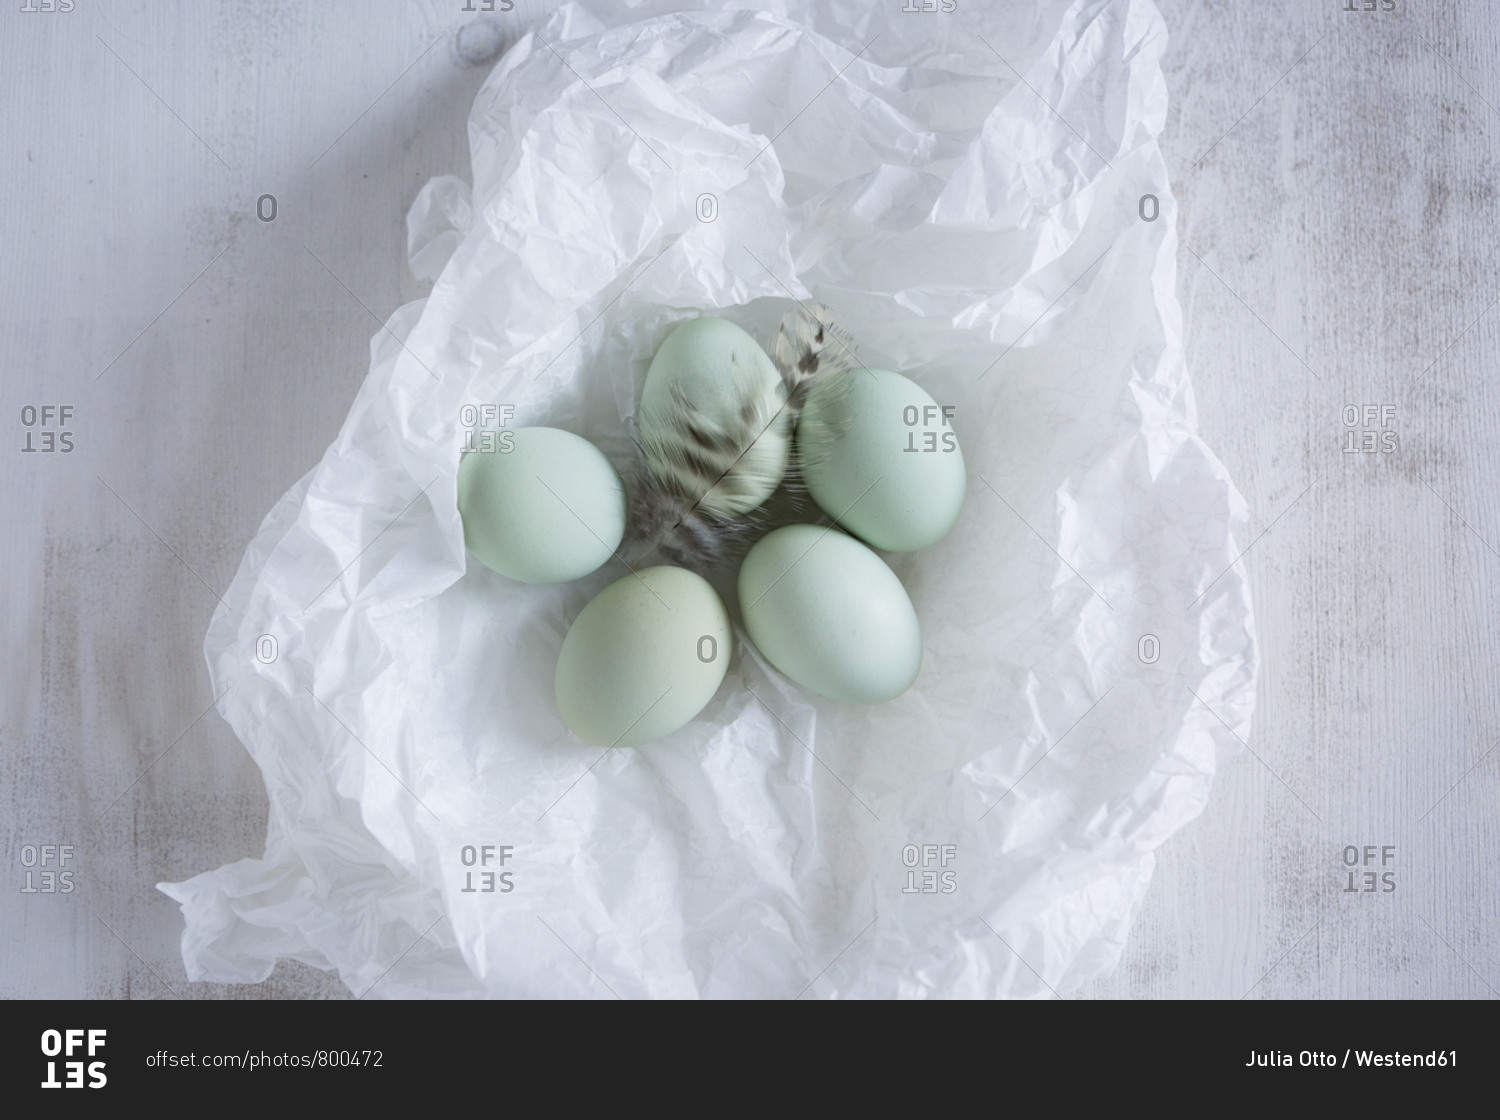 Five green eggs and a feather on white tissue paper